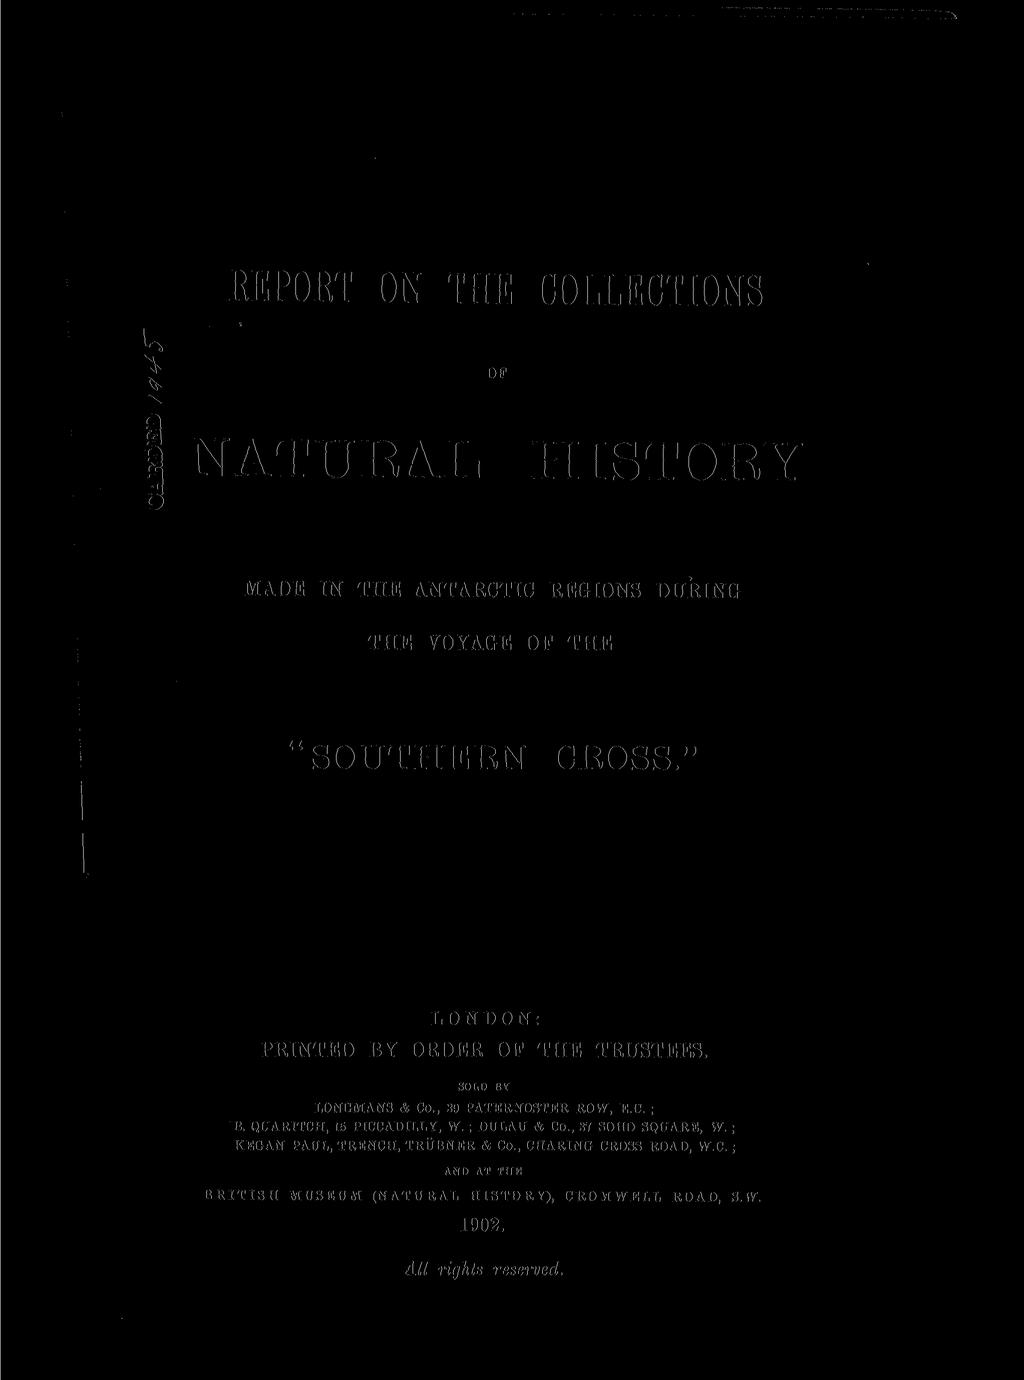 REPORT ON THE COLLECTIONS OF NATURAL HISTORY MADE IN THE ANTARCTIC REGIONS DURING THE VOYAGE OF THE "SOUTHERN CROSS." LONDON: PRINTED BY ORDER OP THE TRUSTEES. SOLD BY LONGMANS & Co.